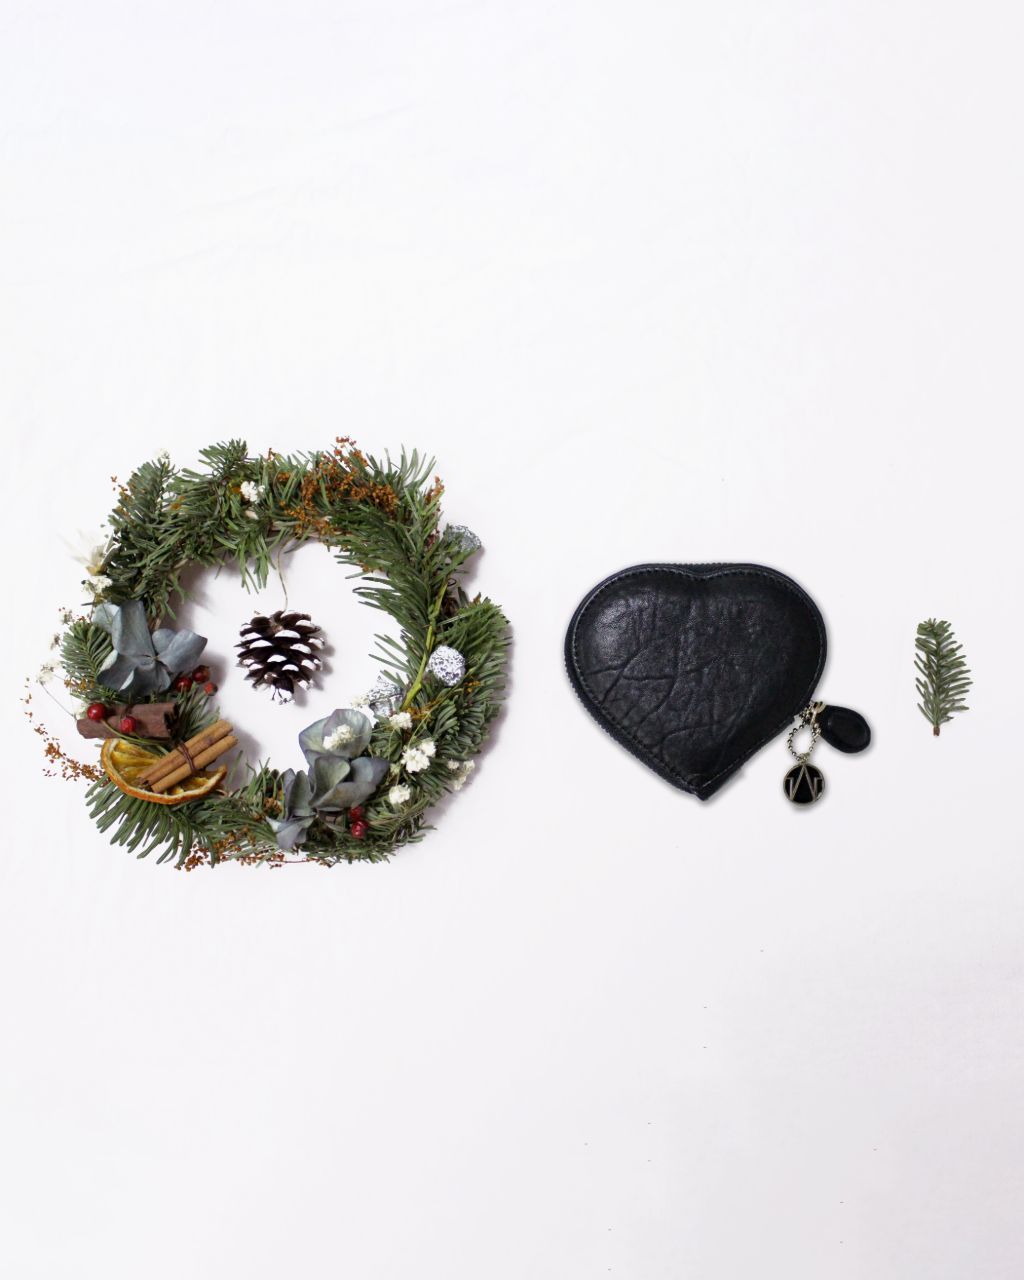 Christmas ring, heart shape coins purse in Black